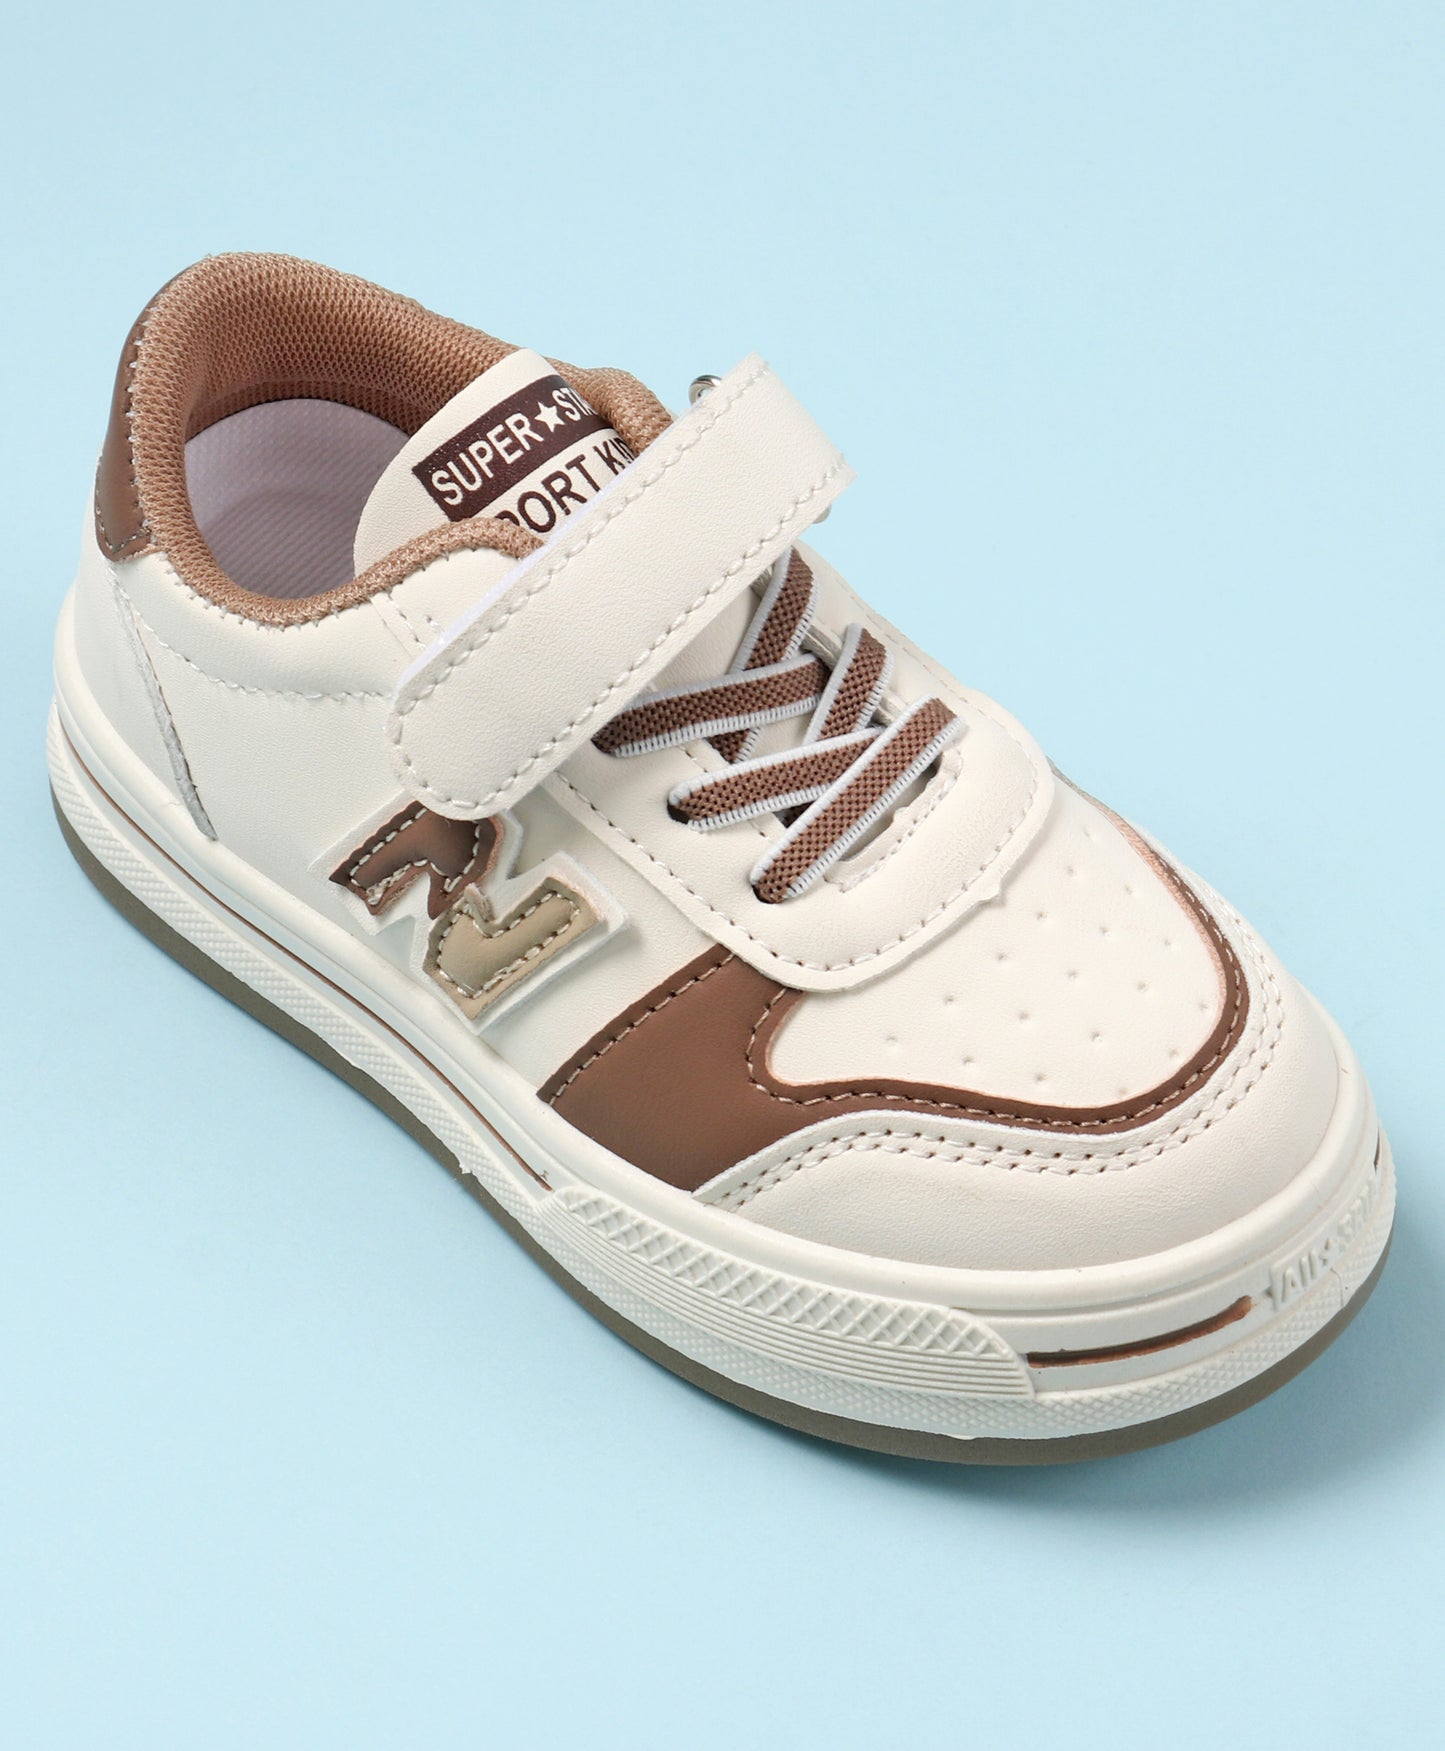 N PATCH VELCRO CLOSURE SNEAKERS - WHITE & BROWN